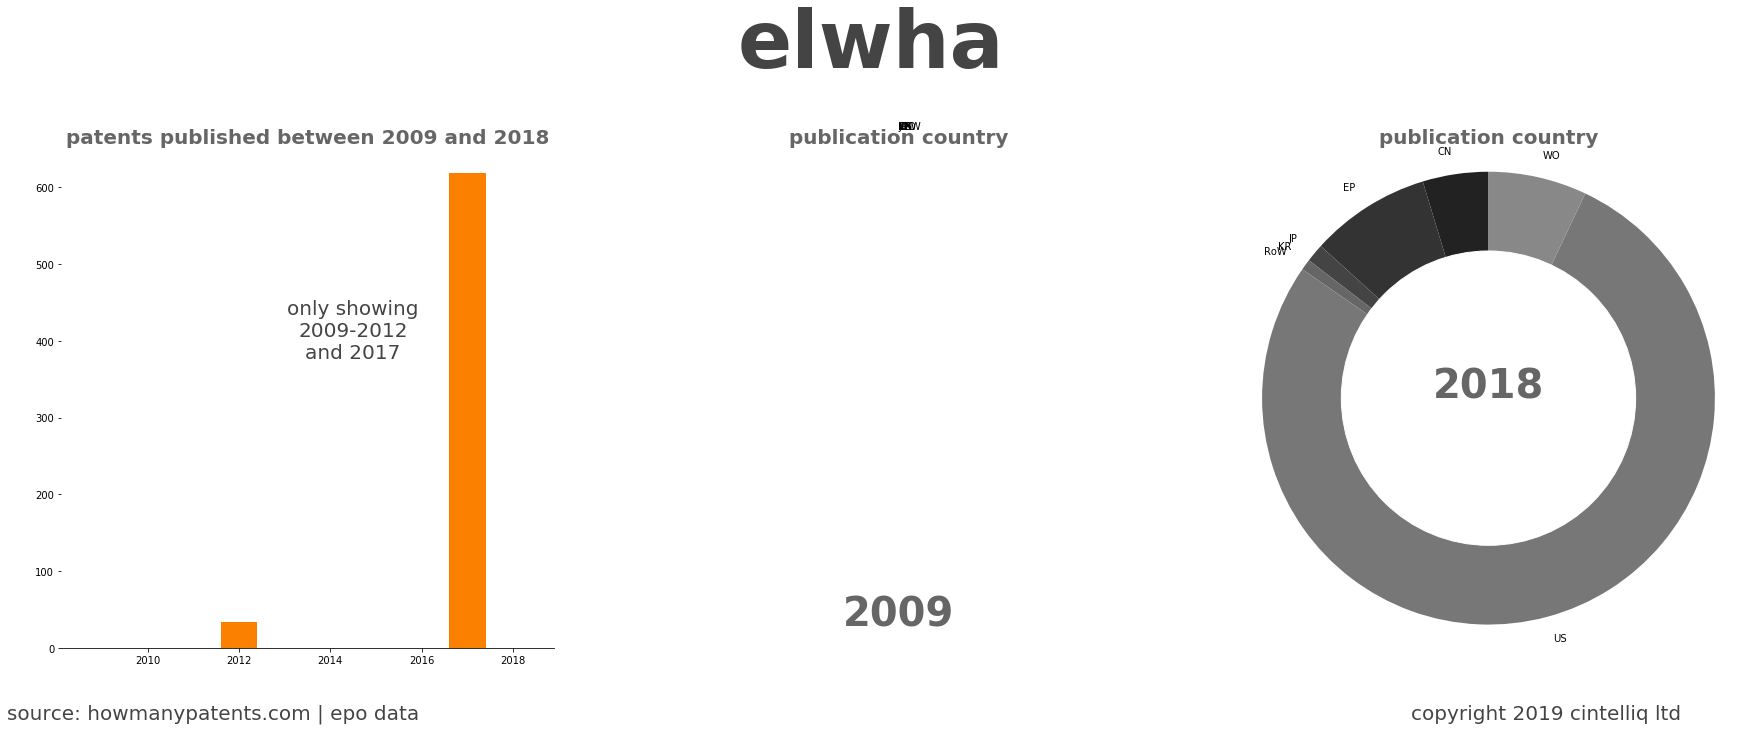 summary of patents for Elwha